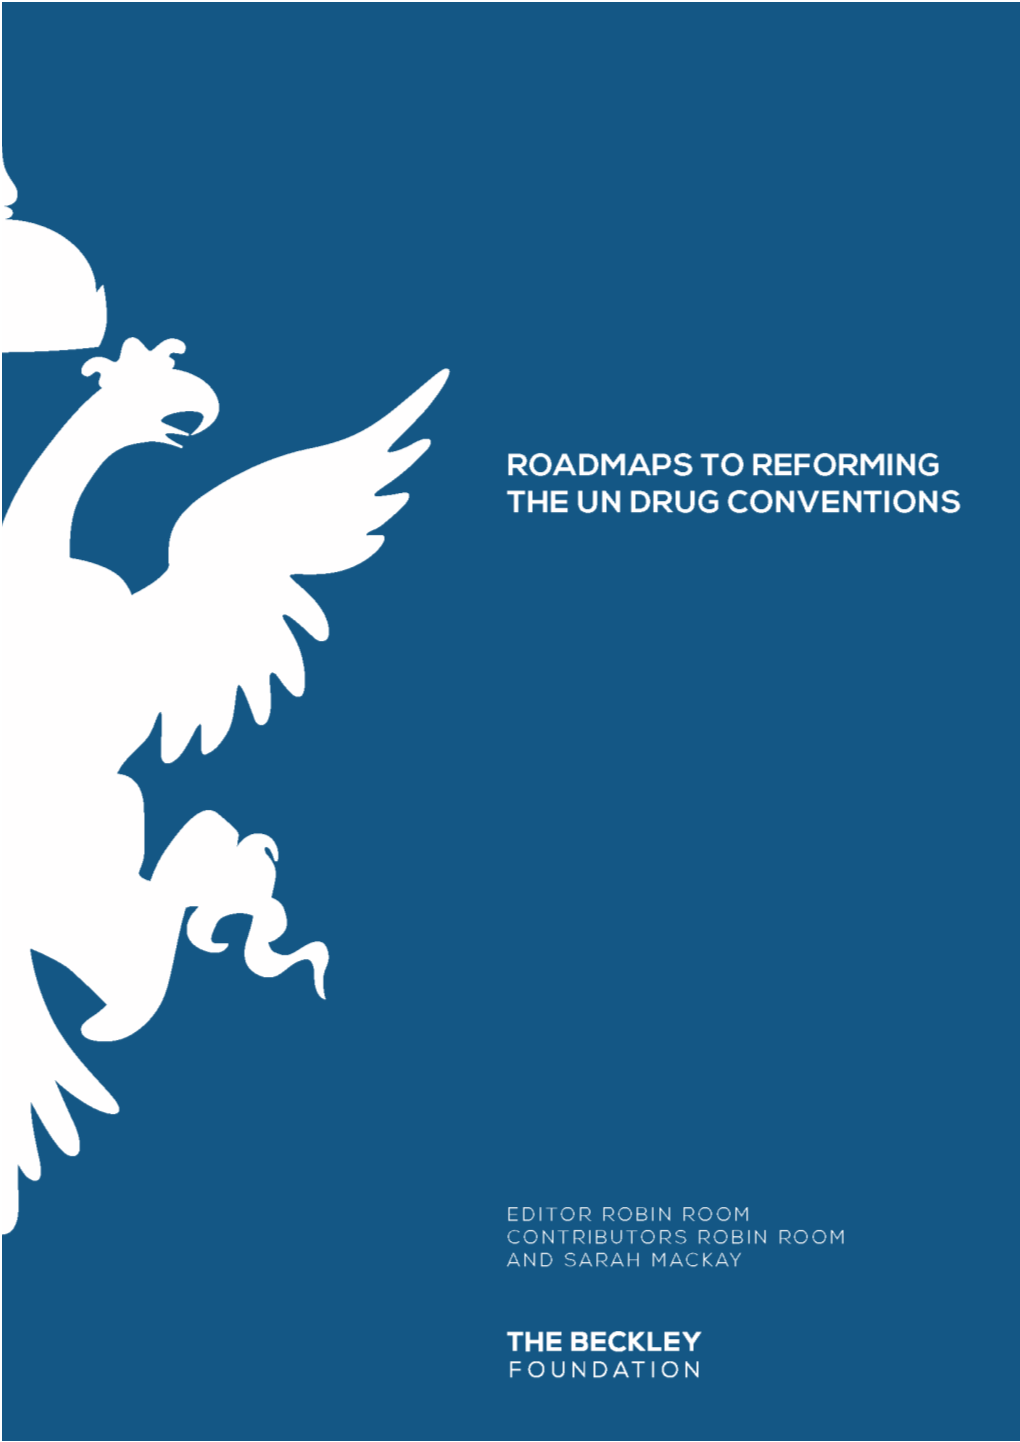 Roadmaps to Reforming the Un Drug Conventions